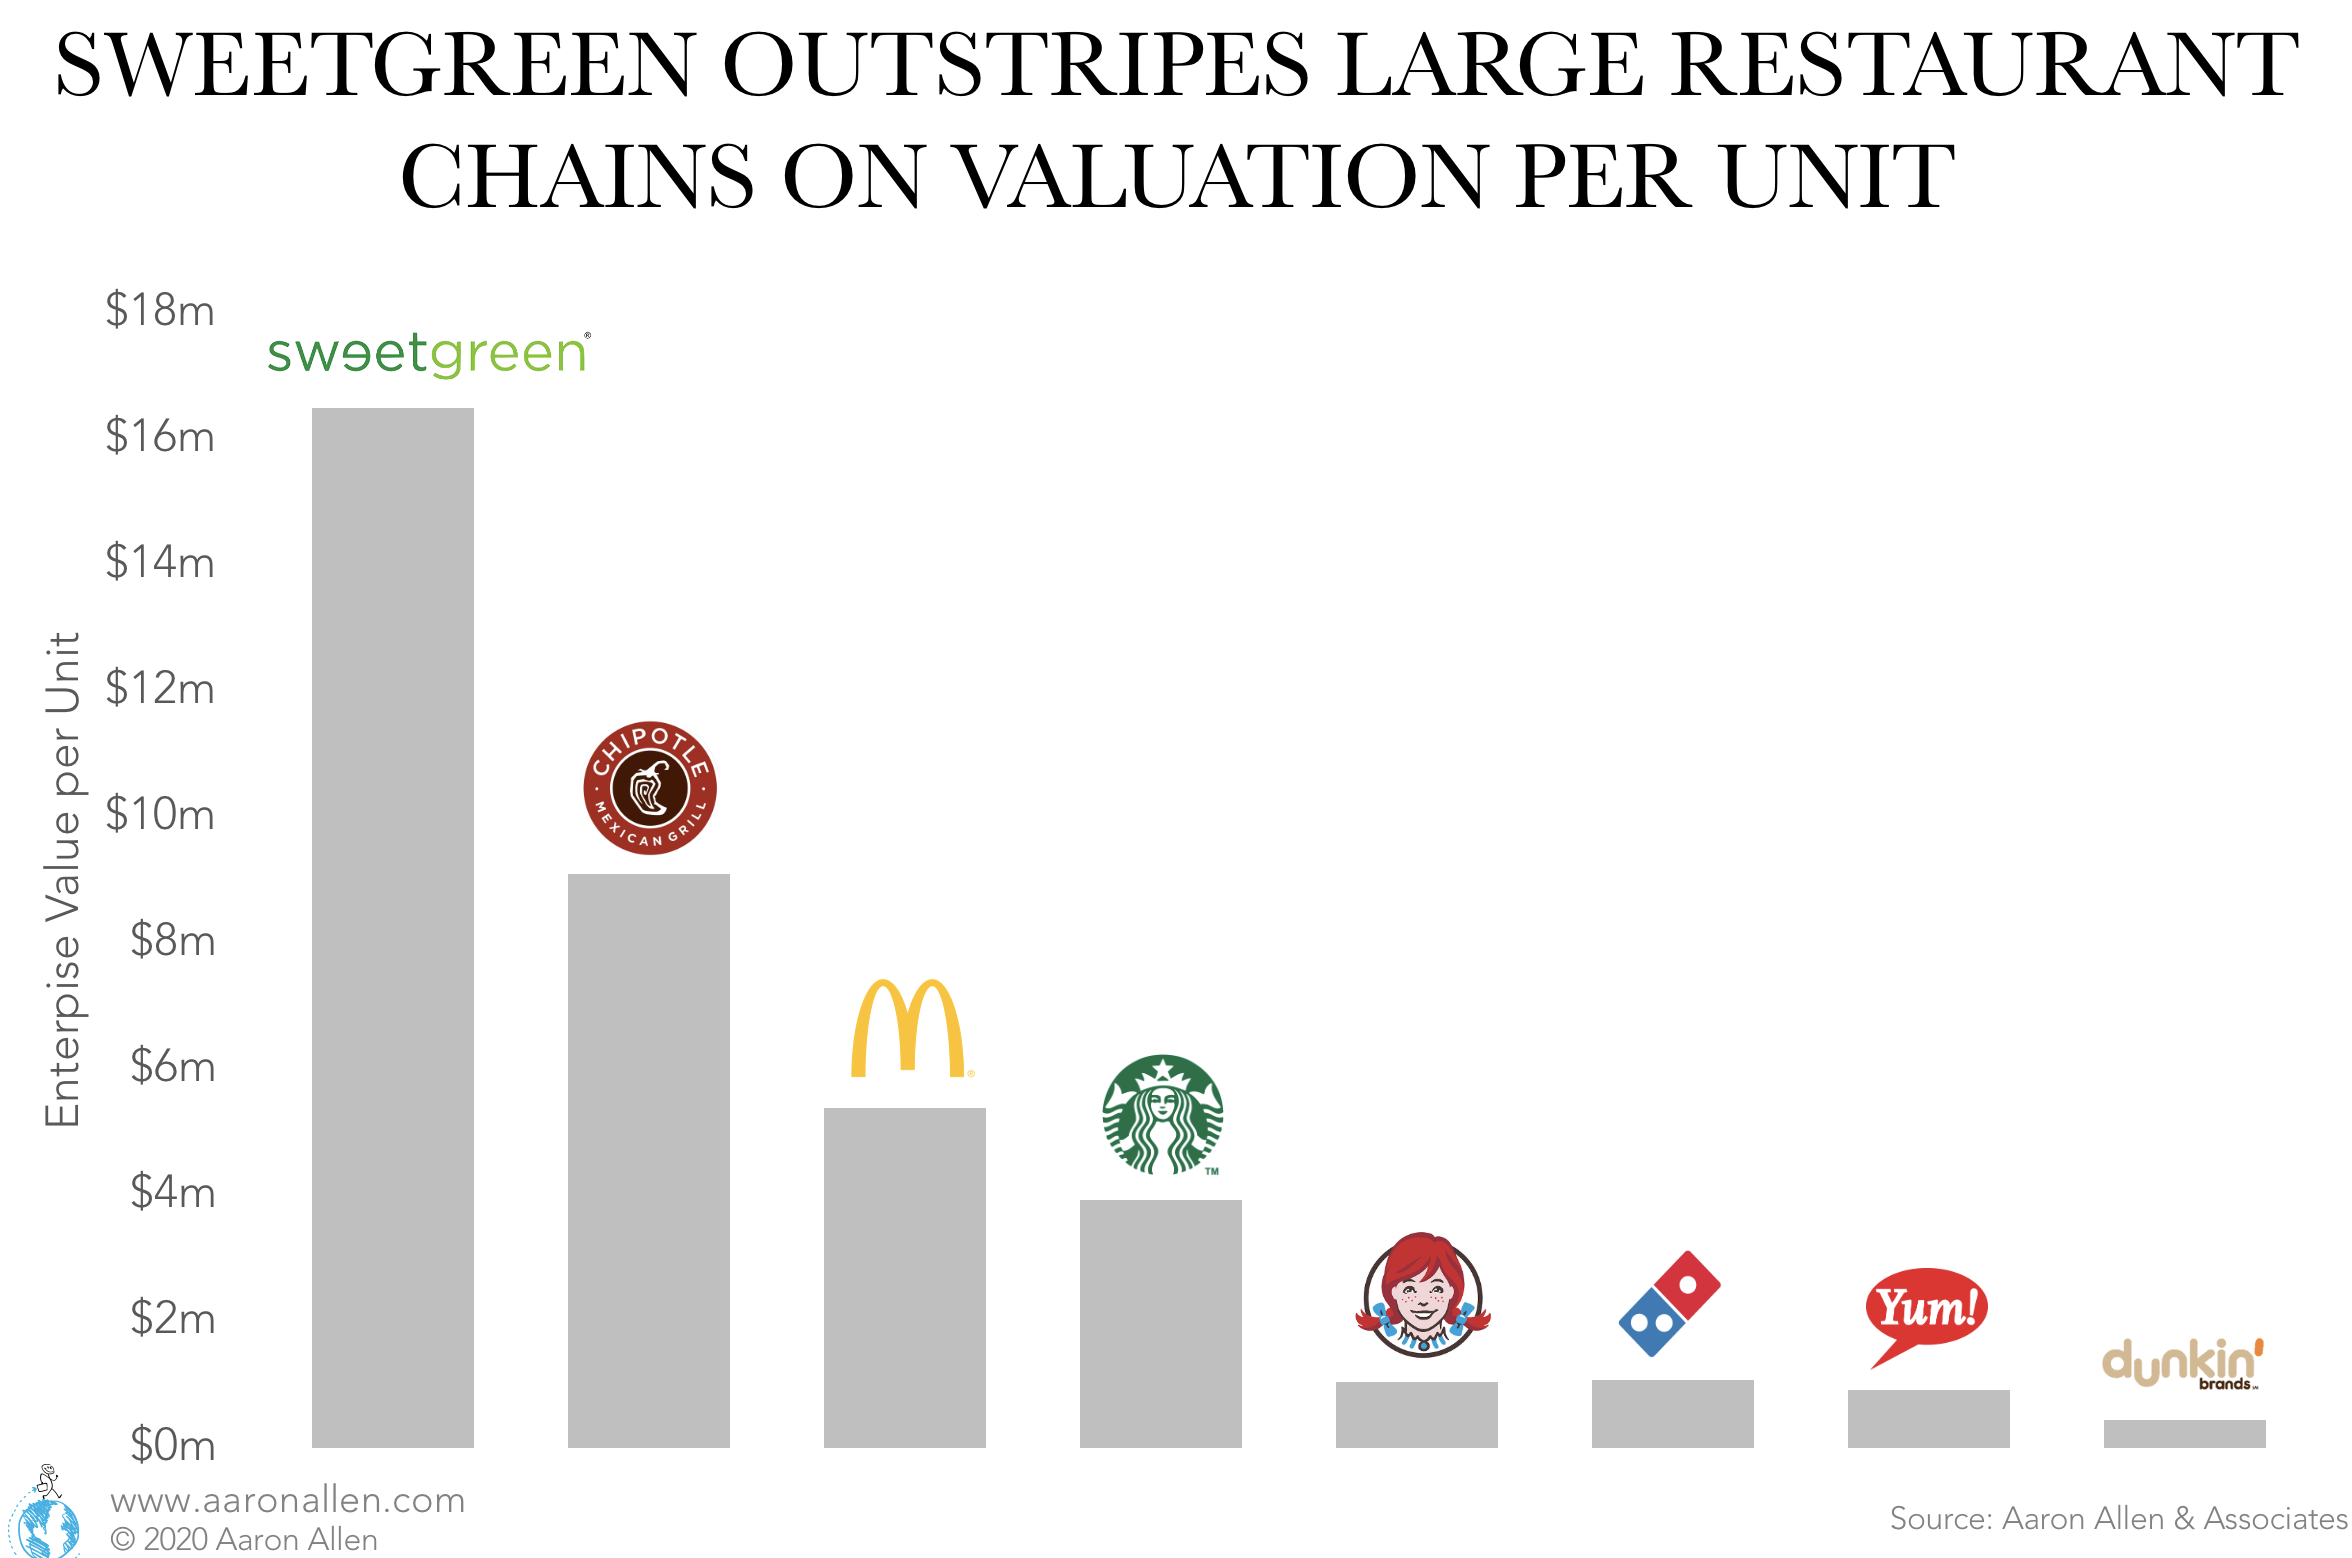 Sweetgreen Leads Competitors on Valuation per Unit